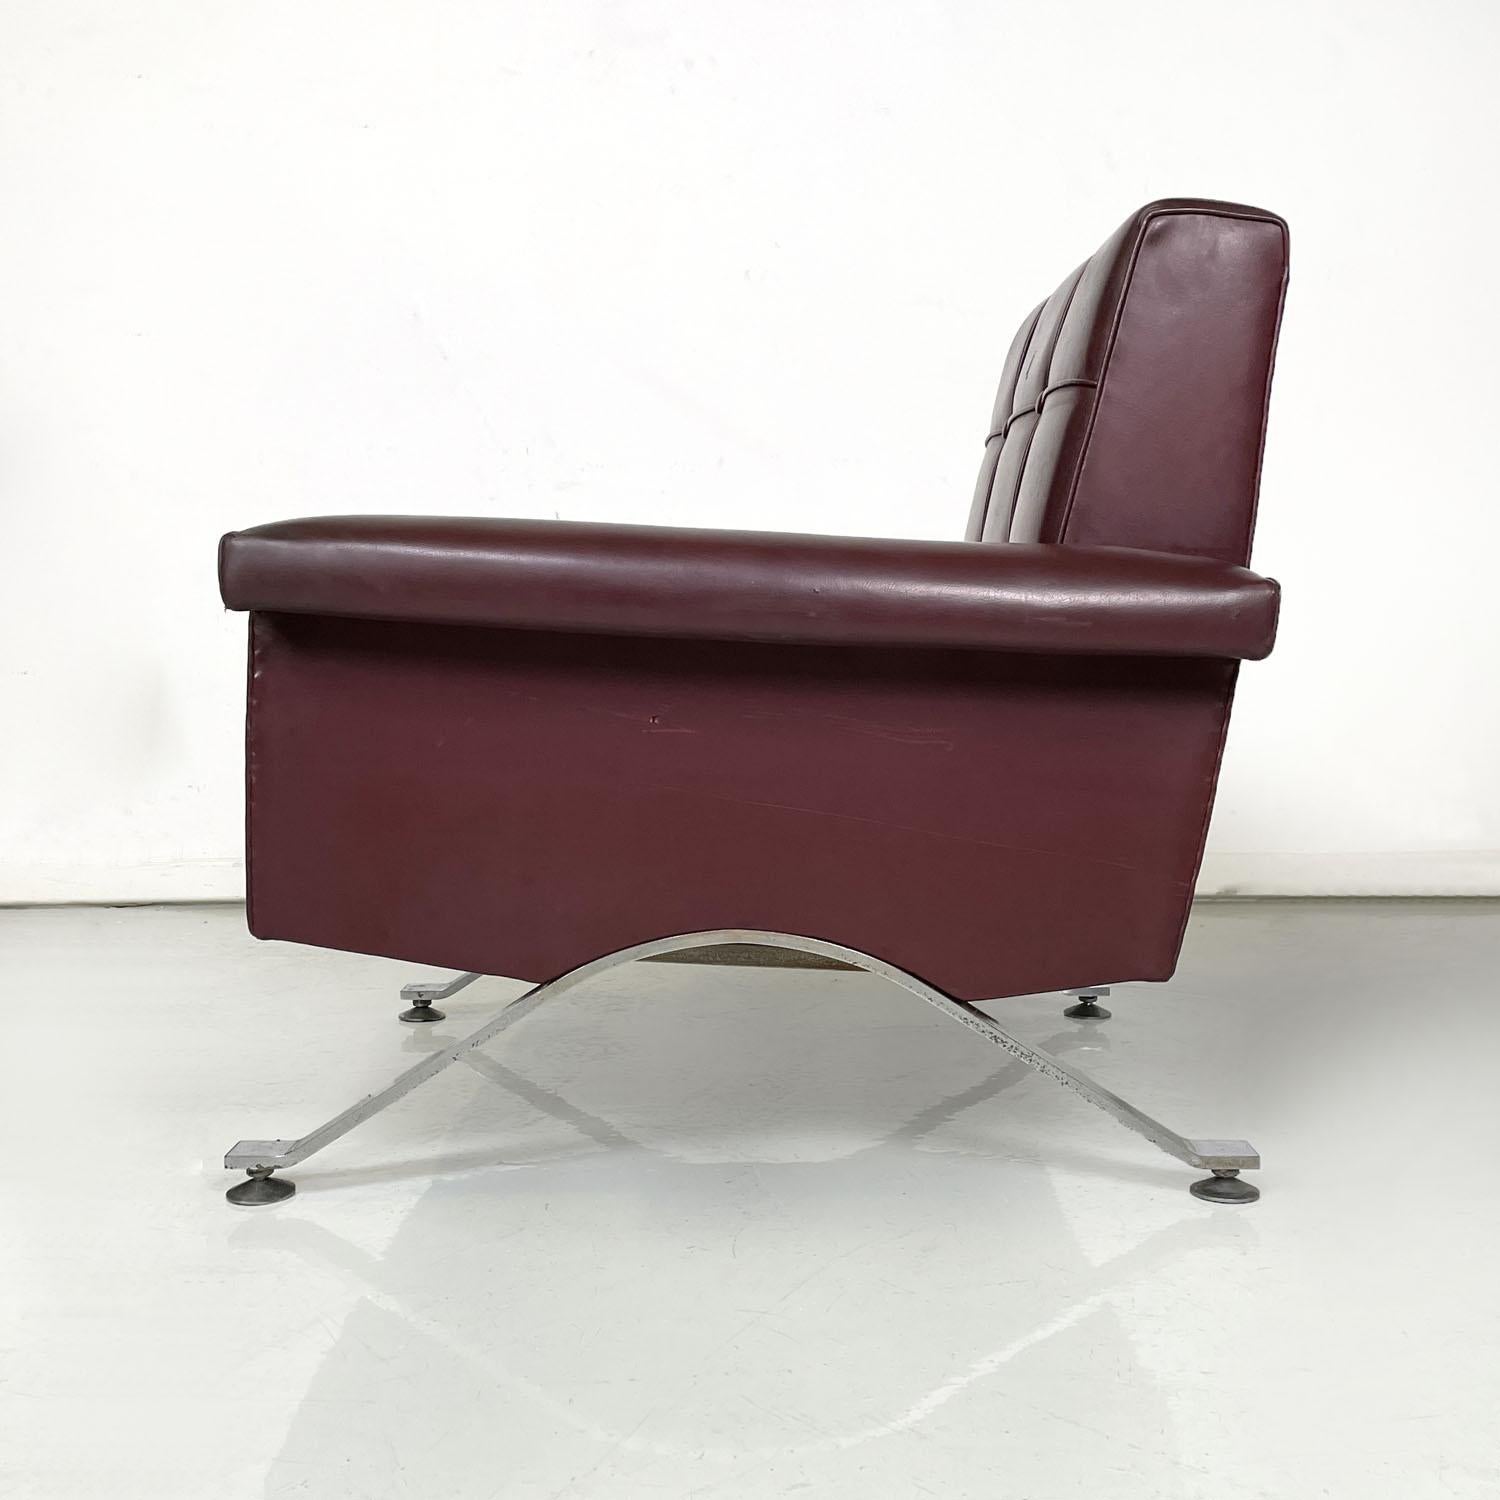 Italian mid-century modern leather armchairs by Ico Parisi for Cassina, 1960s In Good Condition For Sale In MIlano, IT